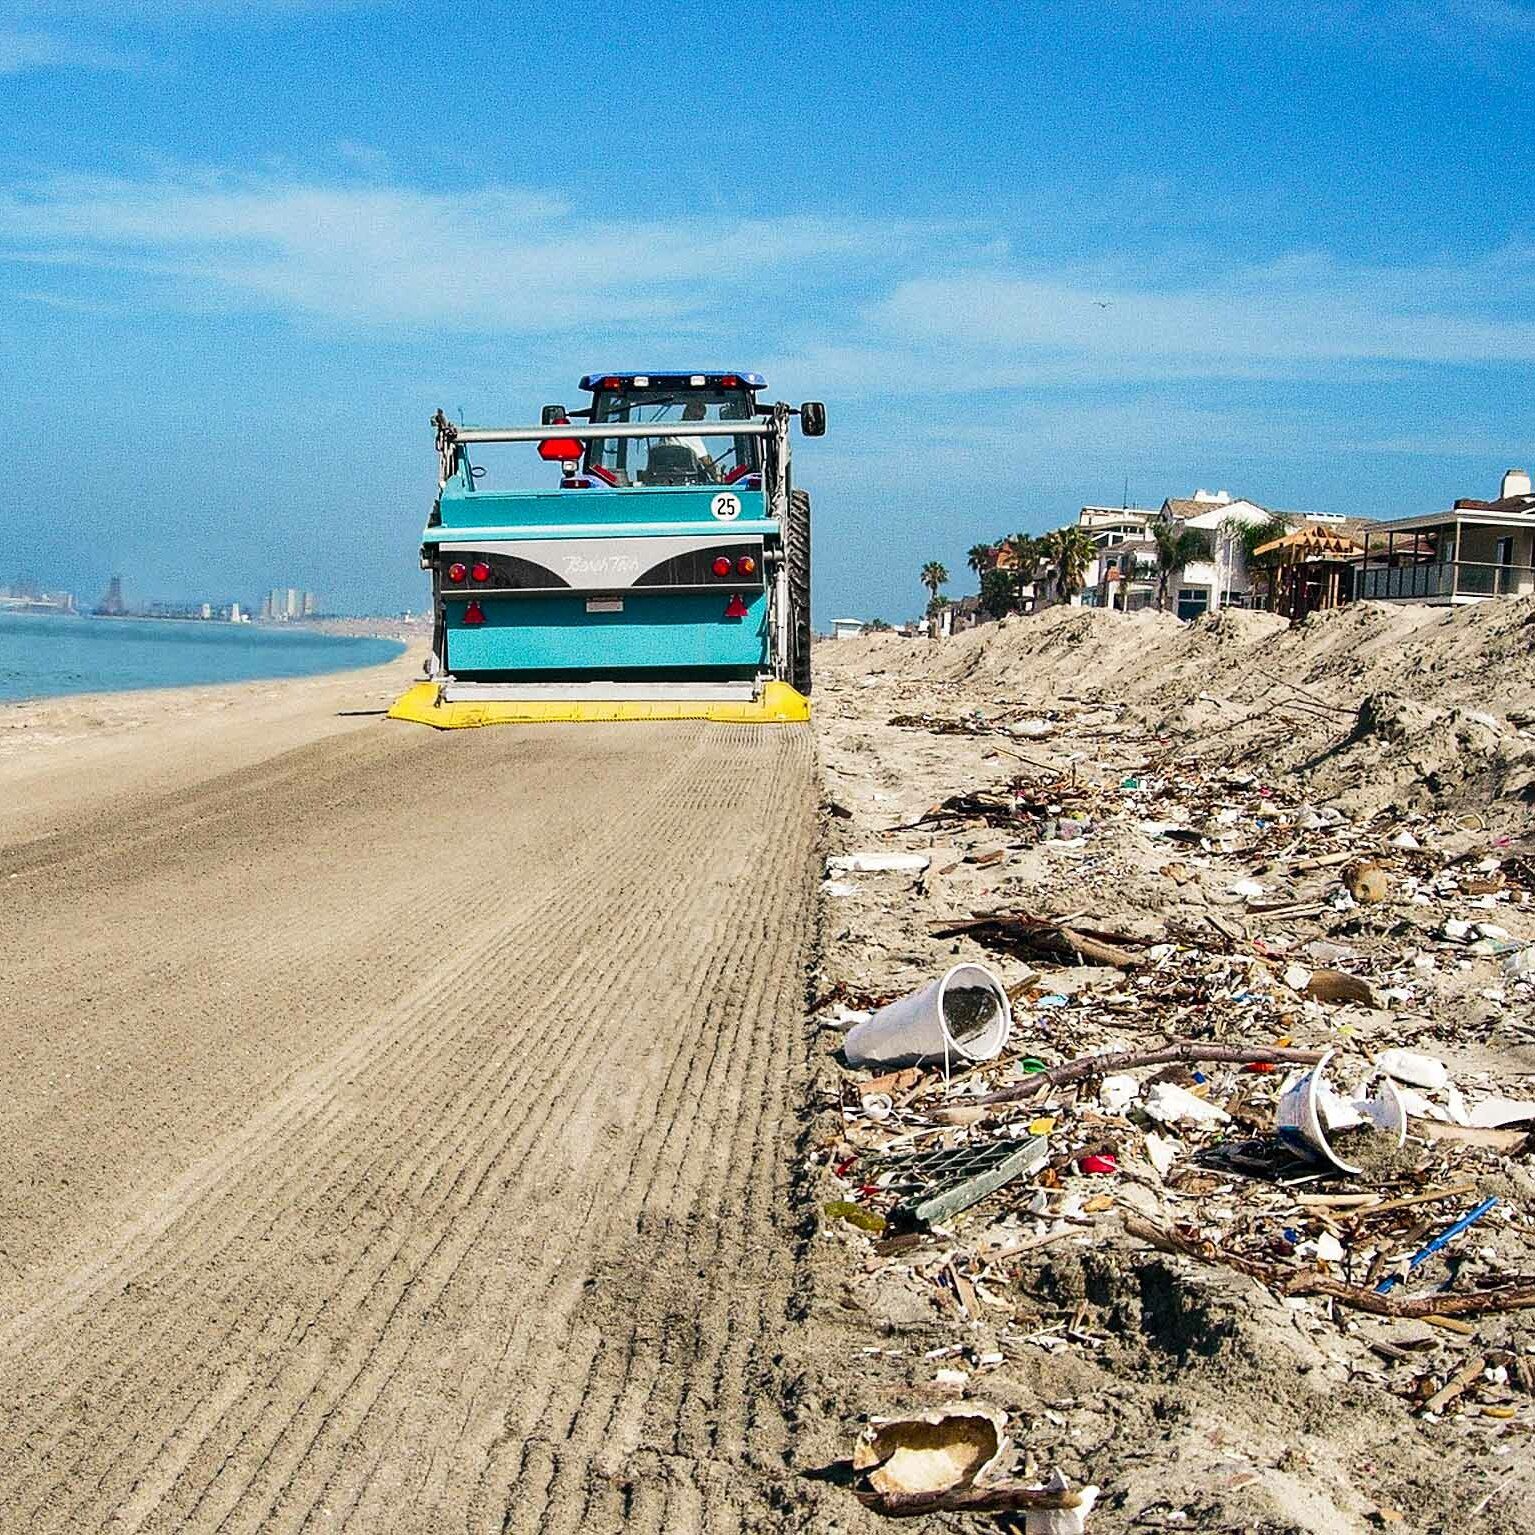 A BeachTech vehicle cleans a beach filled with trash